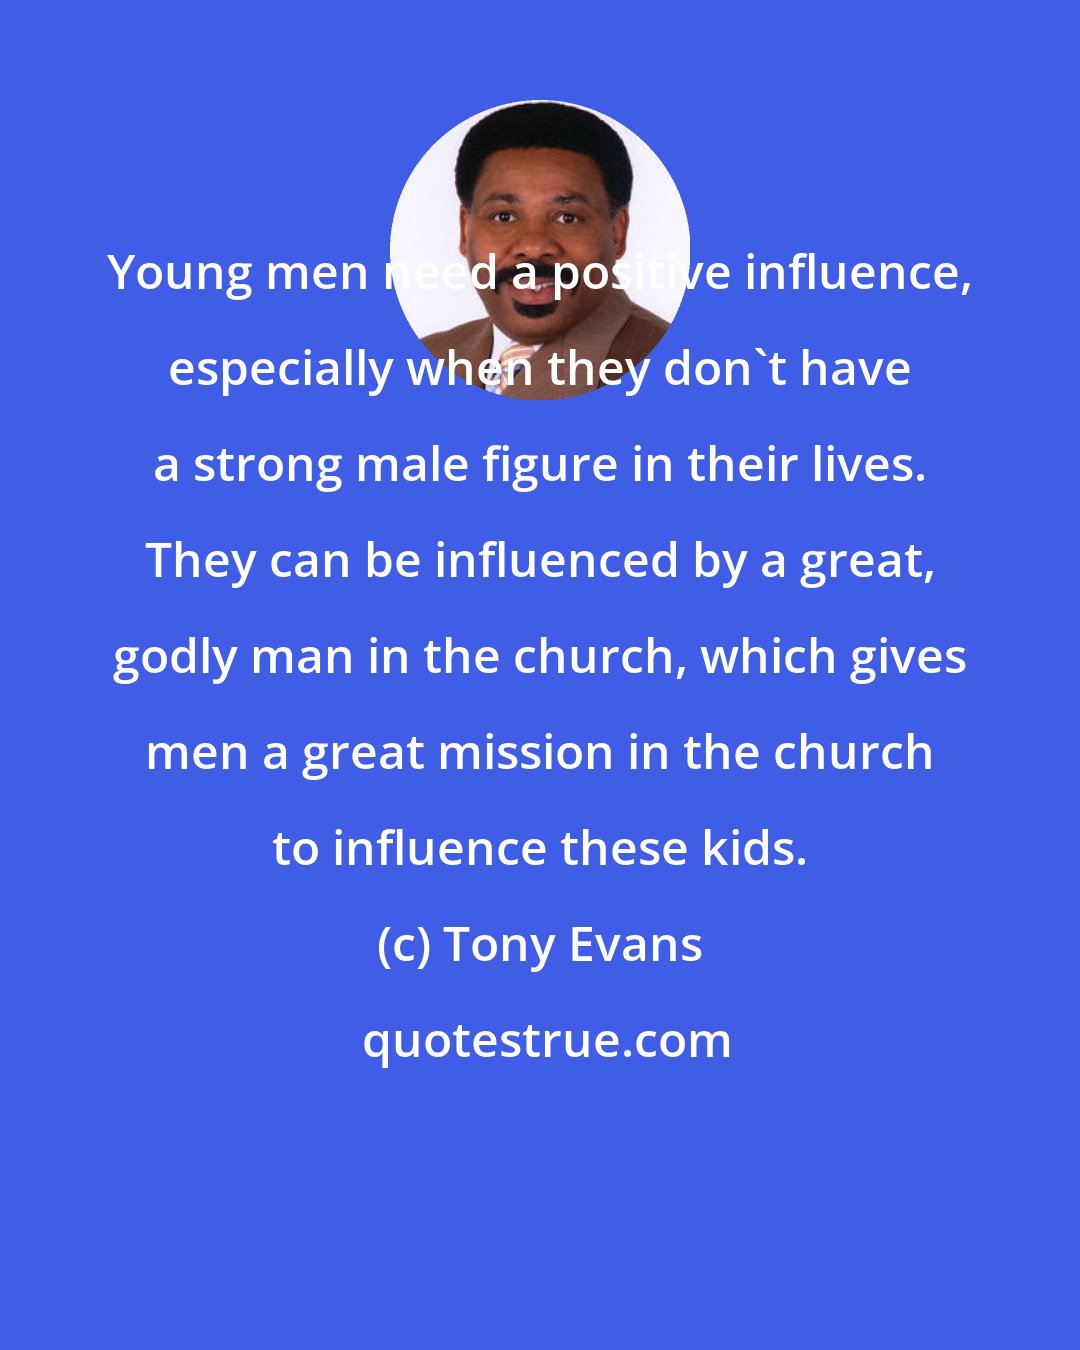 Tony Evans: Young men need a positive influence, especially when they don't have a strong male figure in their lives. They can be influenced by a great, godly man in the church, which gives men a great mission in the church to influence these kids.